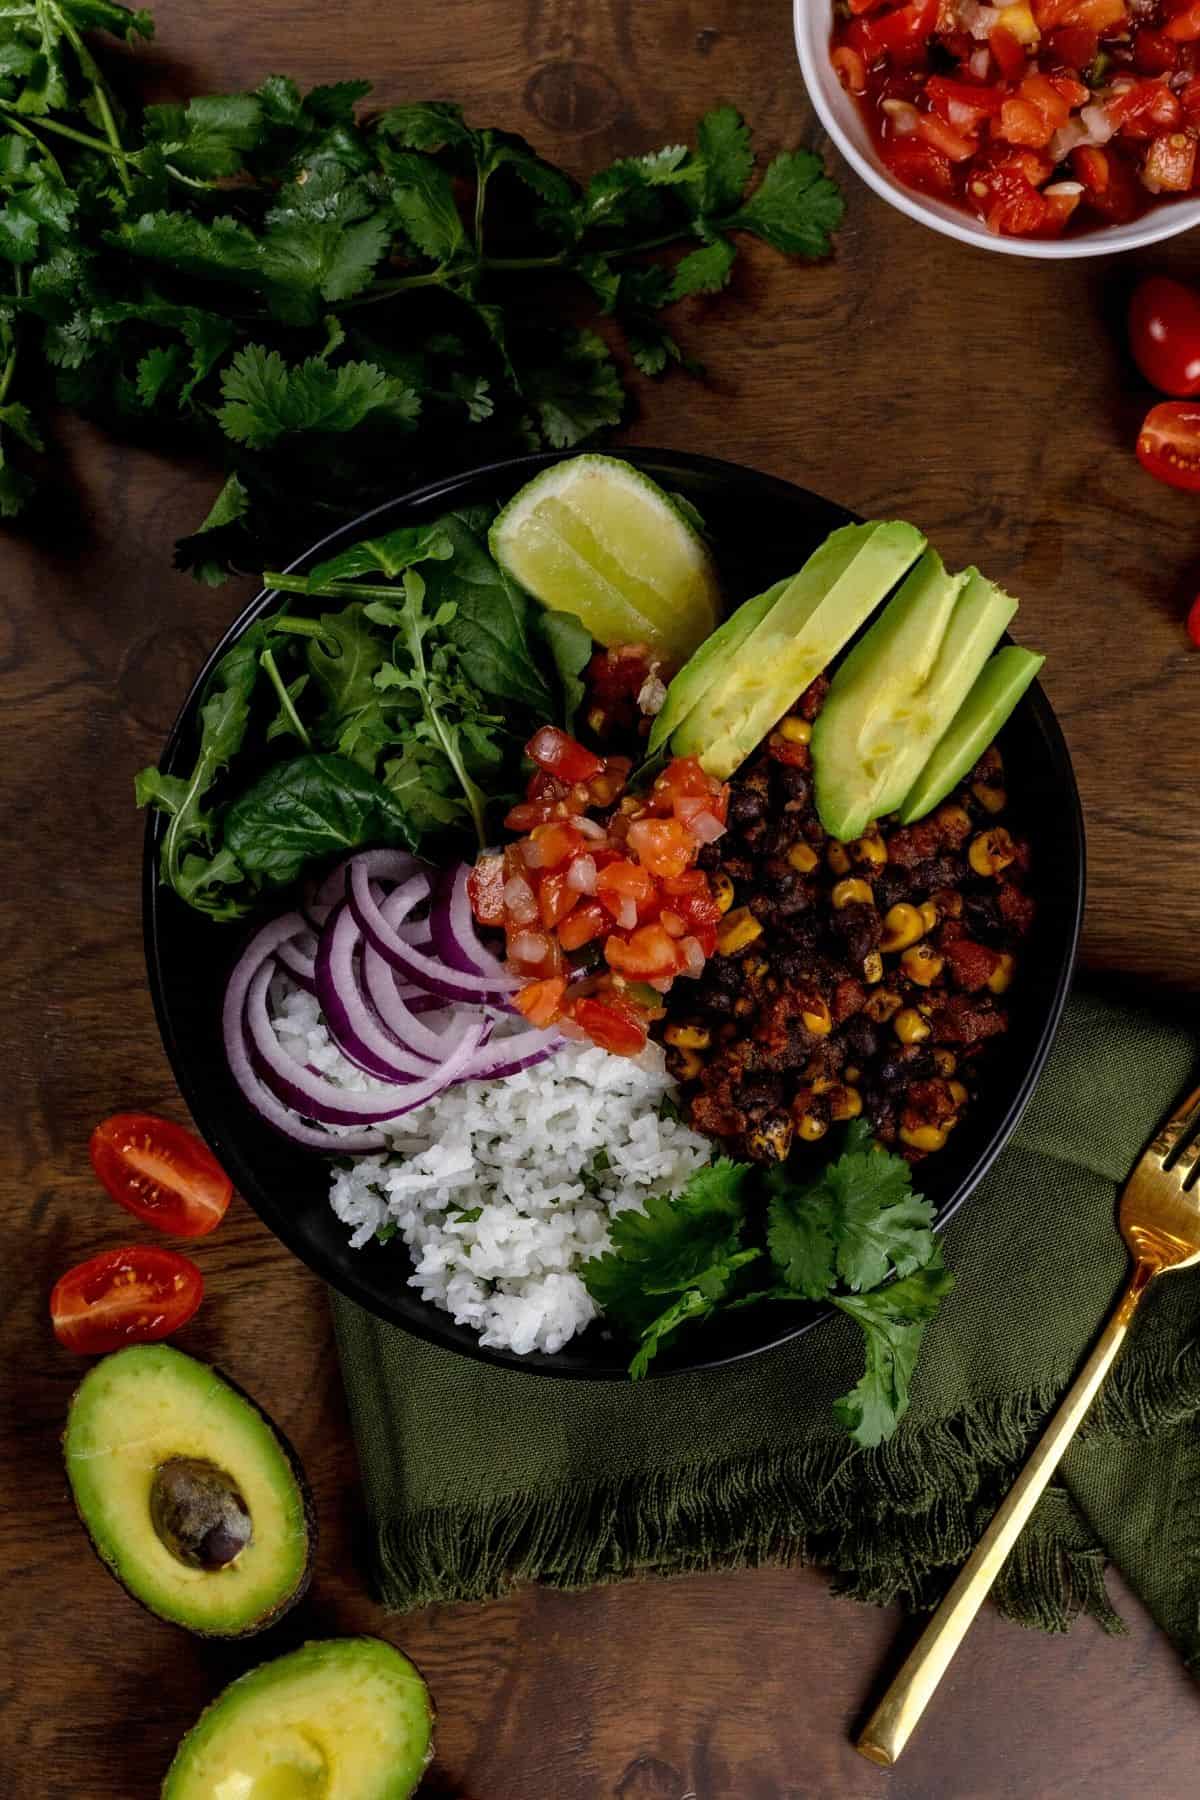 A look down at a dark bowl on a wood table filled with a veggie burrito bowl. Things like rice, beans, corn, salsa, onion, greens, avocado, and more are piled high in the bowl with extras scattered around the bowl on the tabletop. A green napkin and gold fork are in the lower right corner.